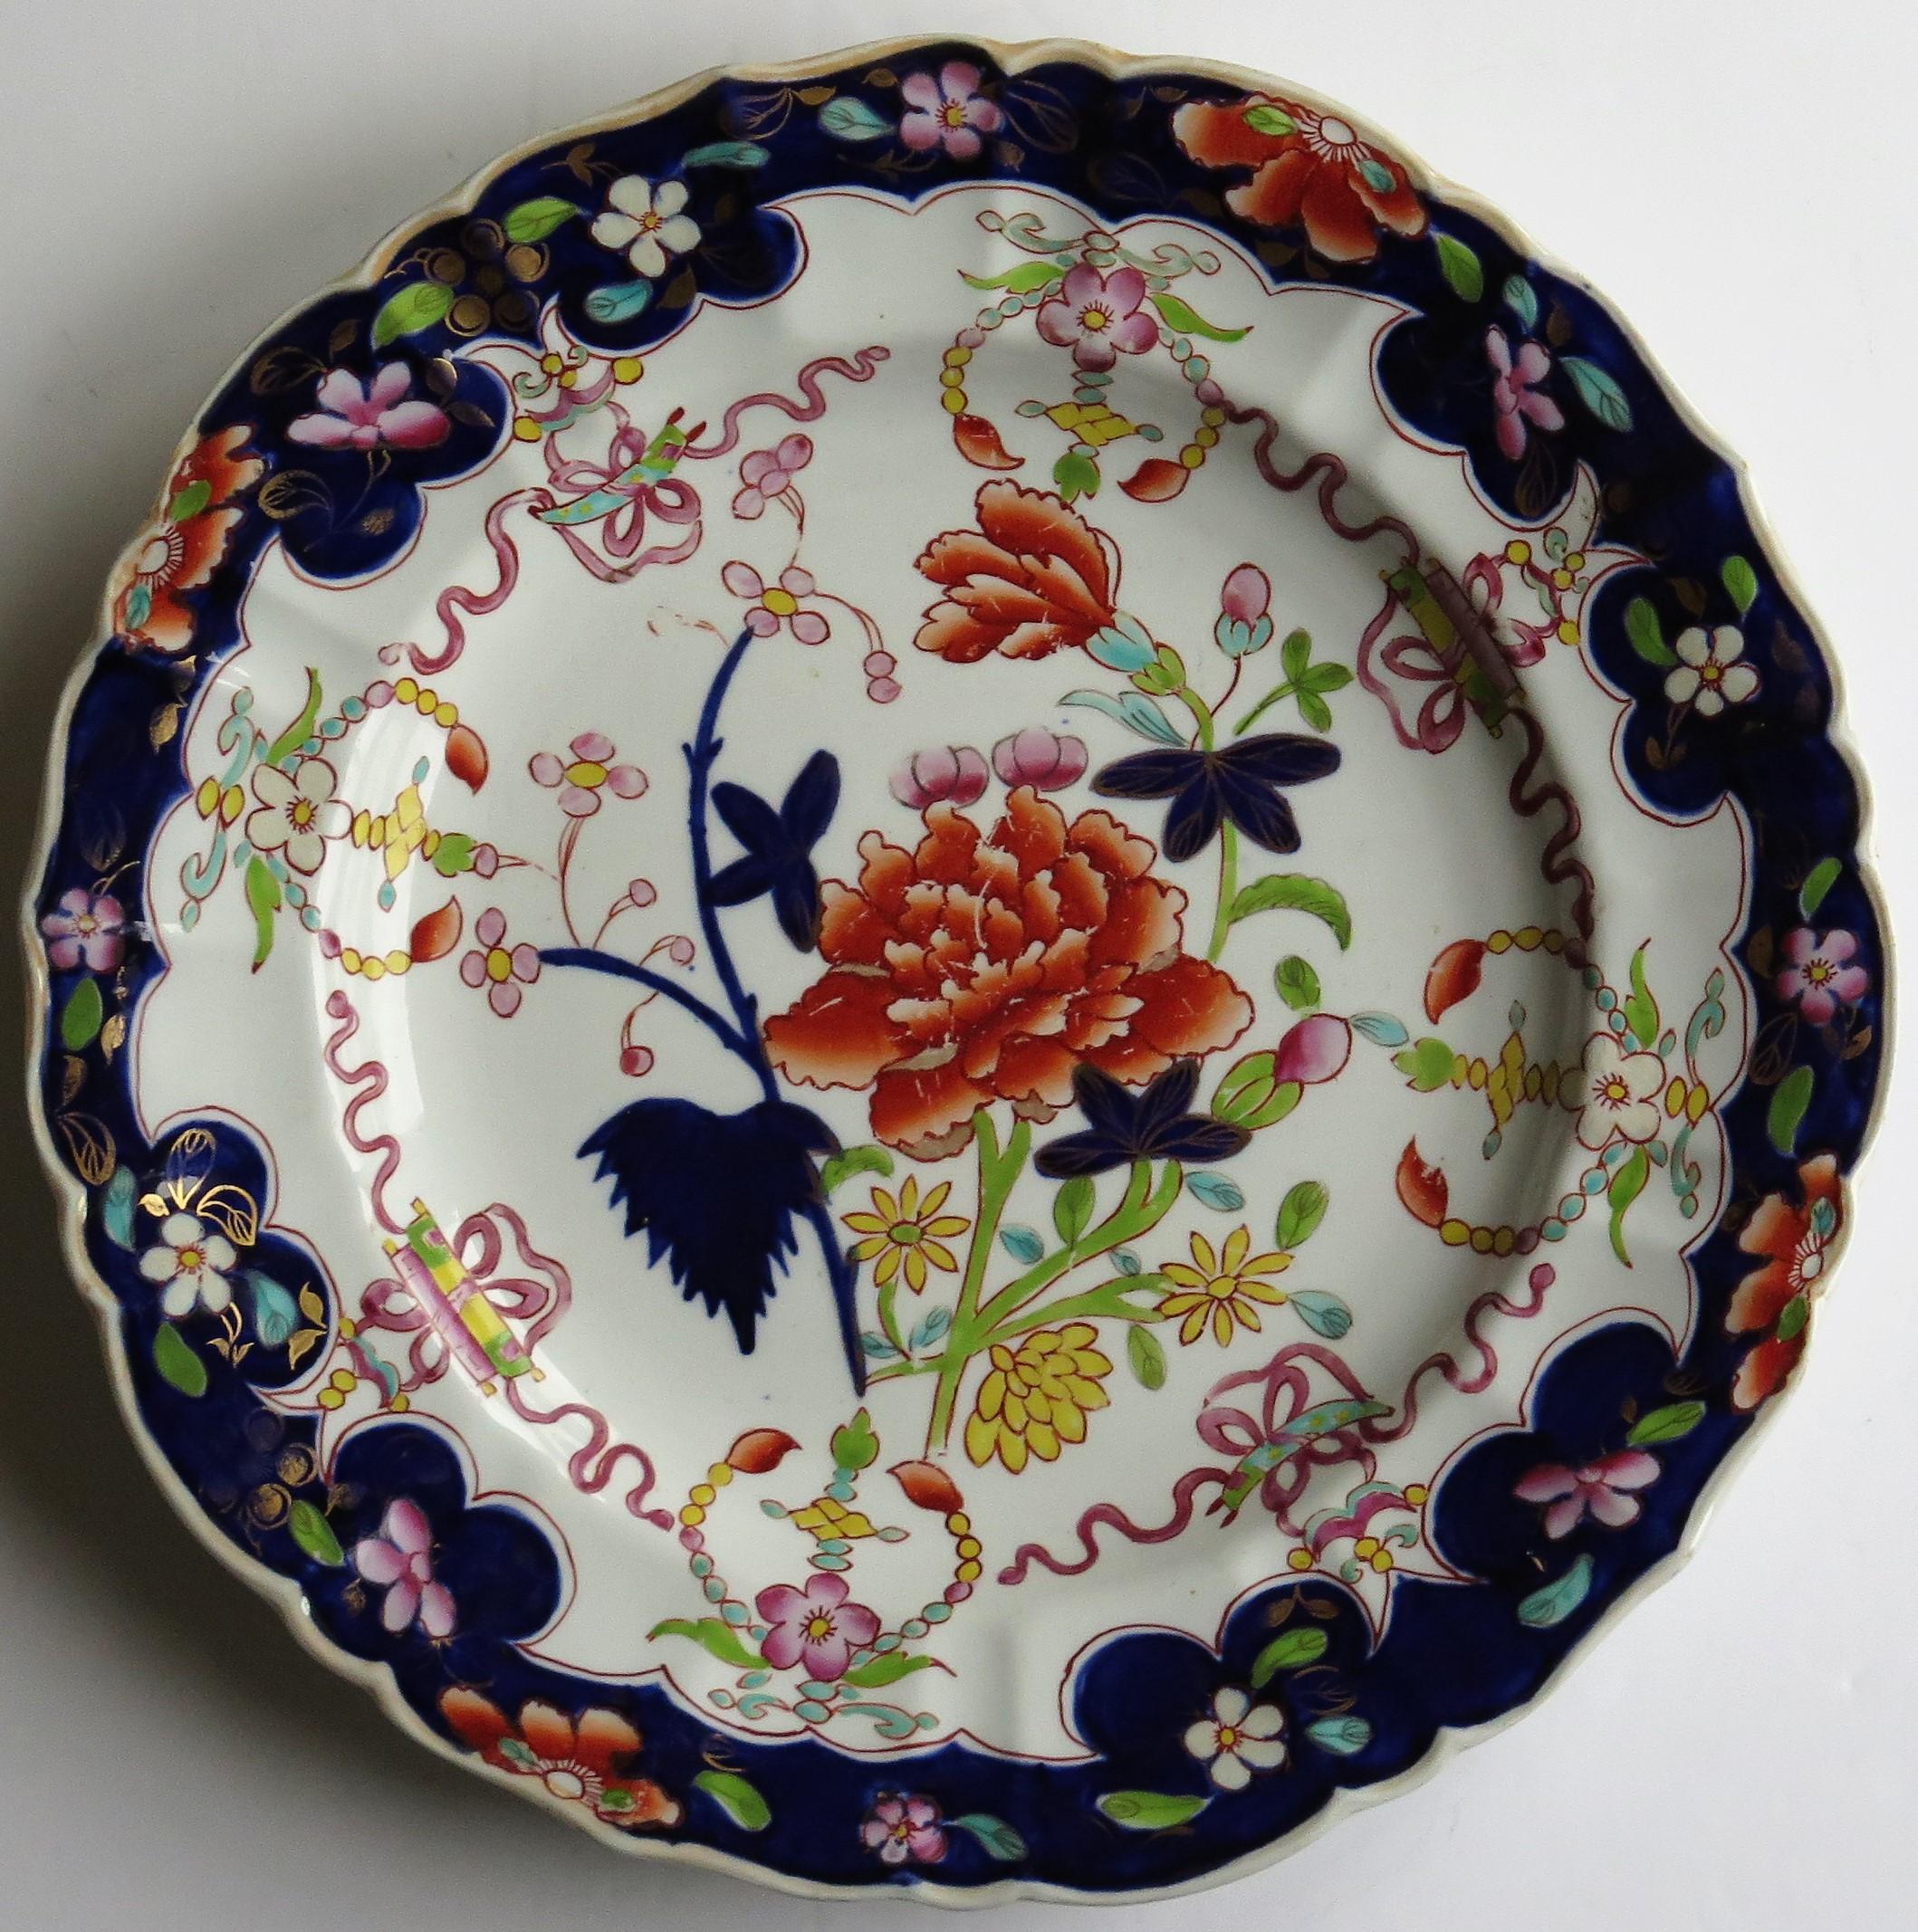 This distinctive ironstone pottery large dinner plate was made by the Mason's factory at Lane Delph, Staffordshire, England and is hand decorated in the 